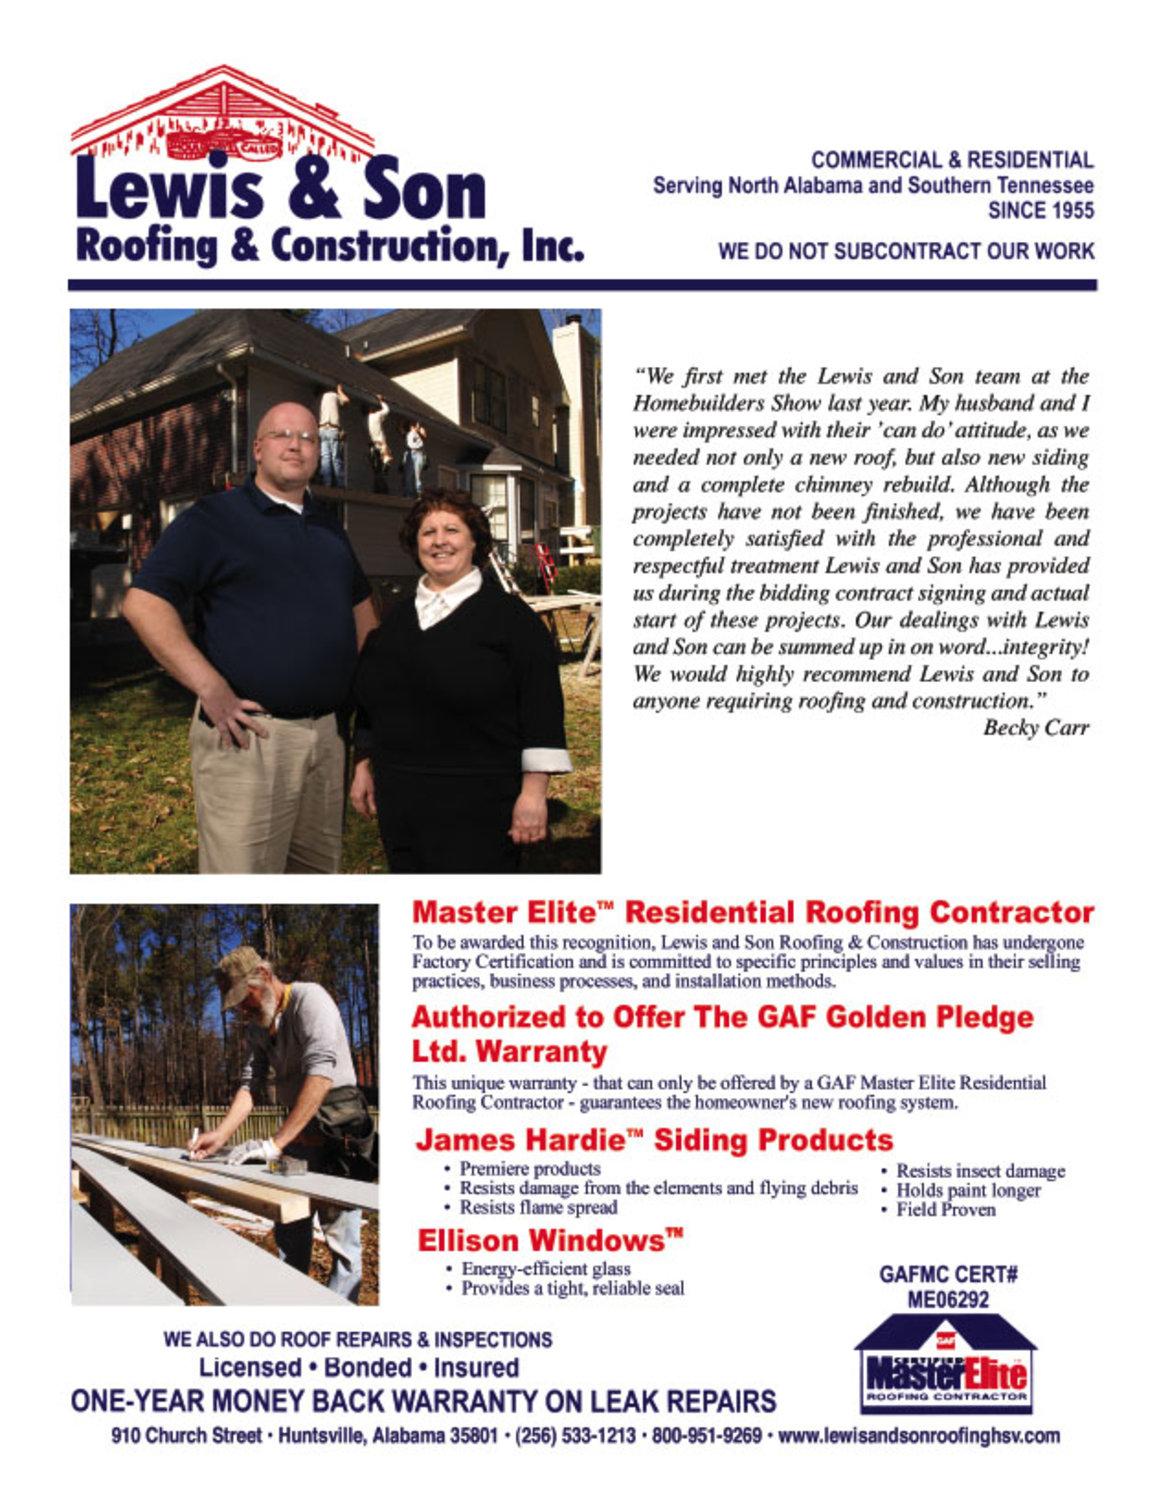 Lewis and Son Roofing Images